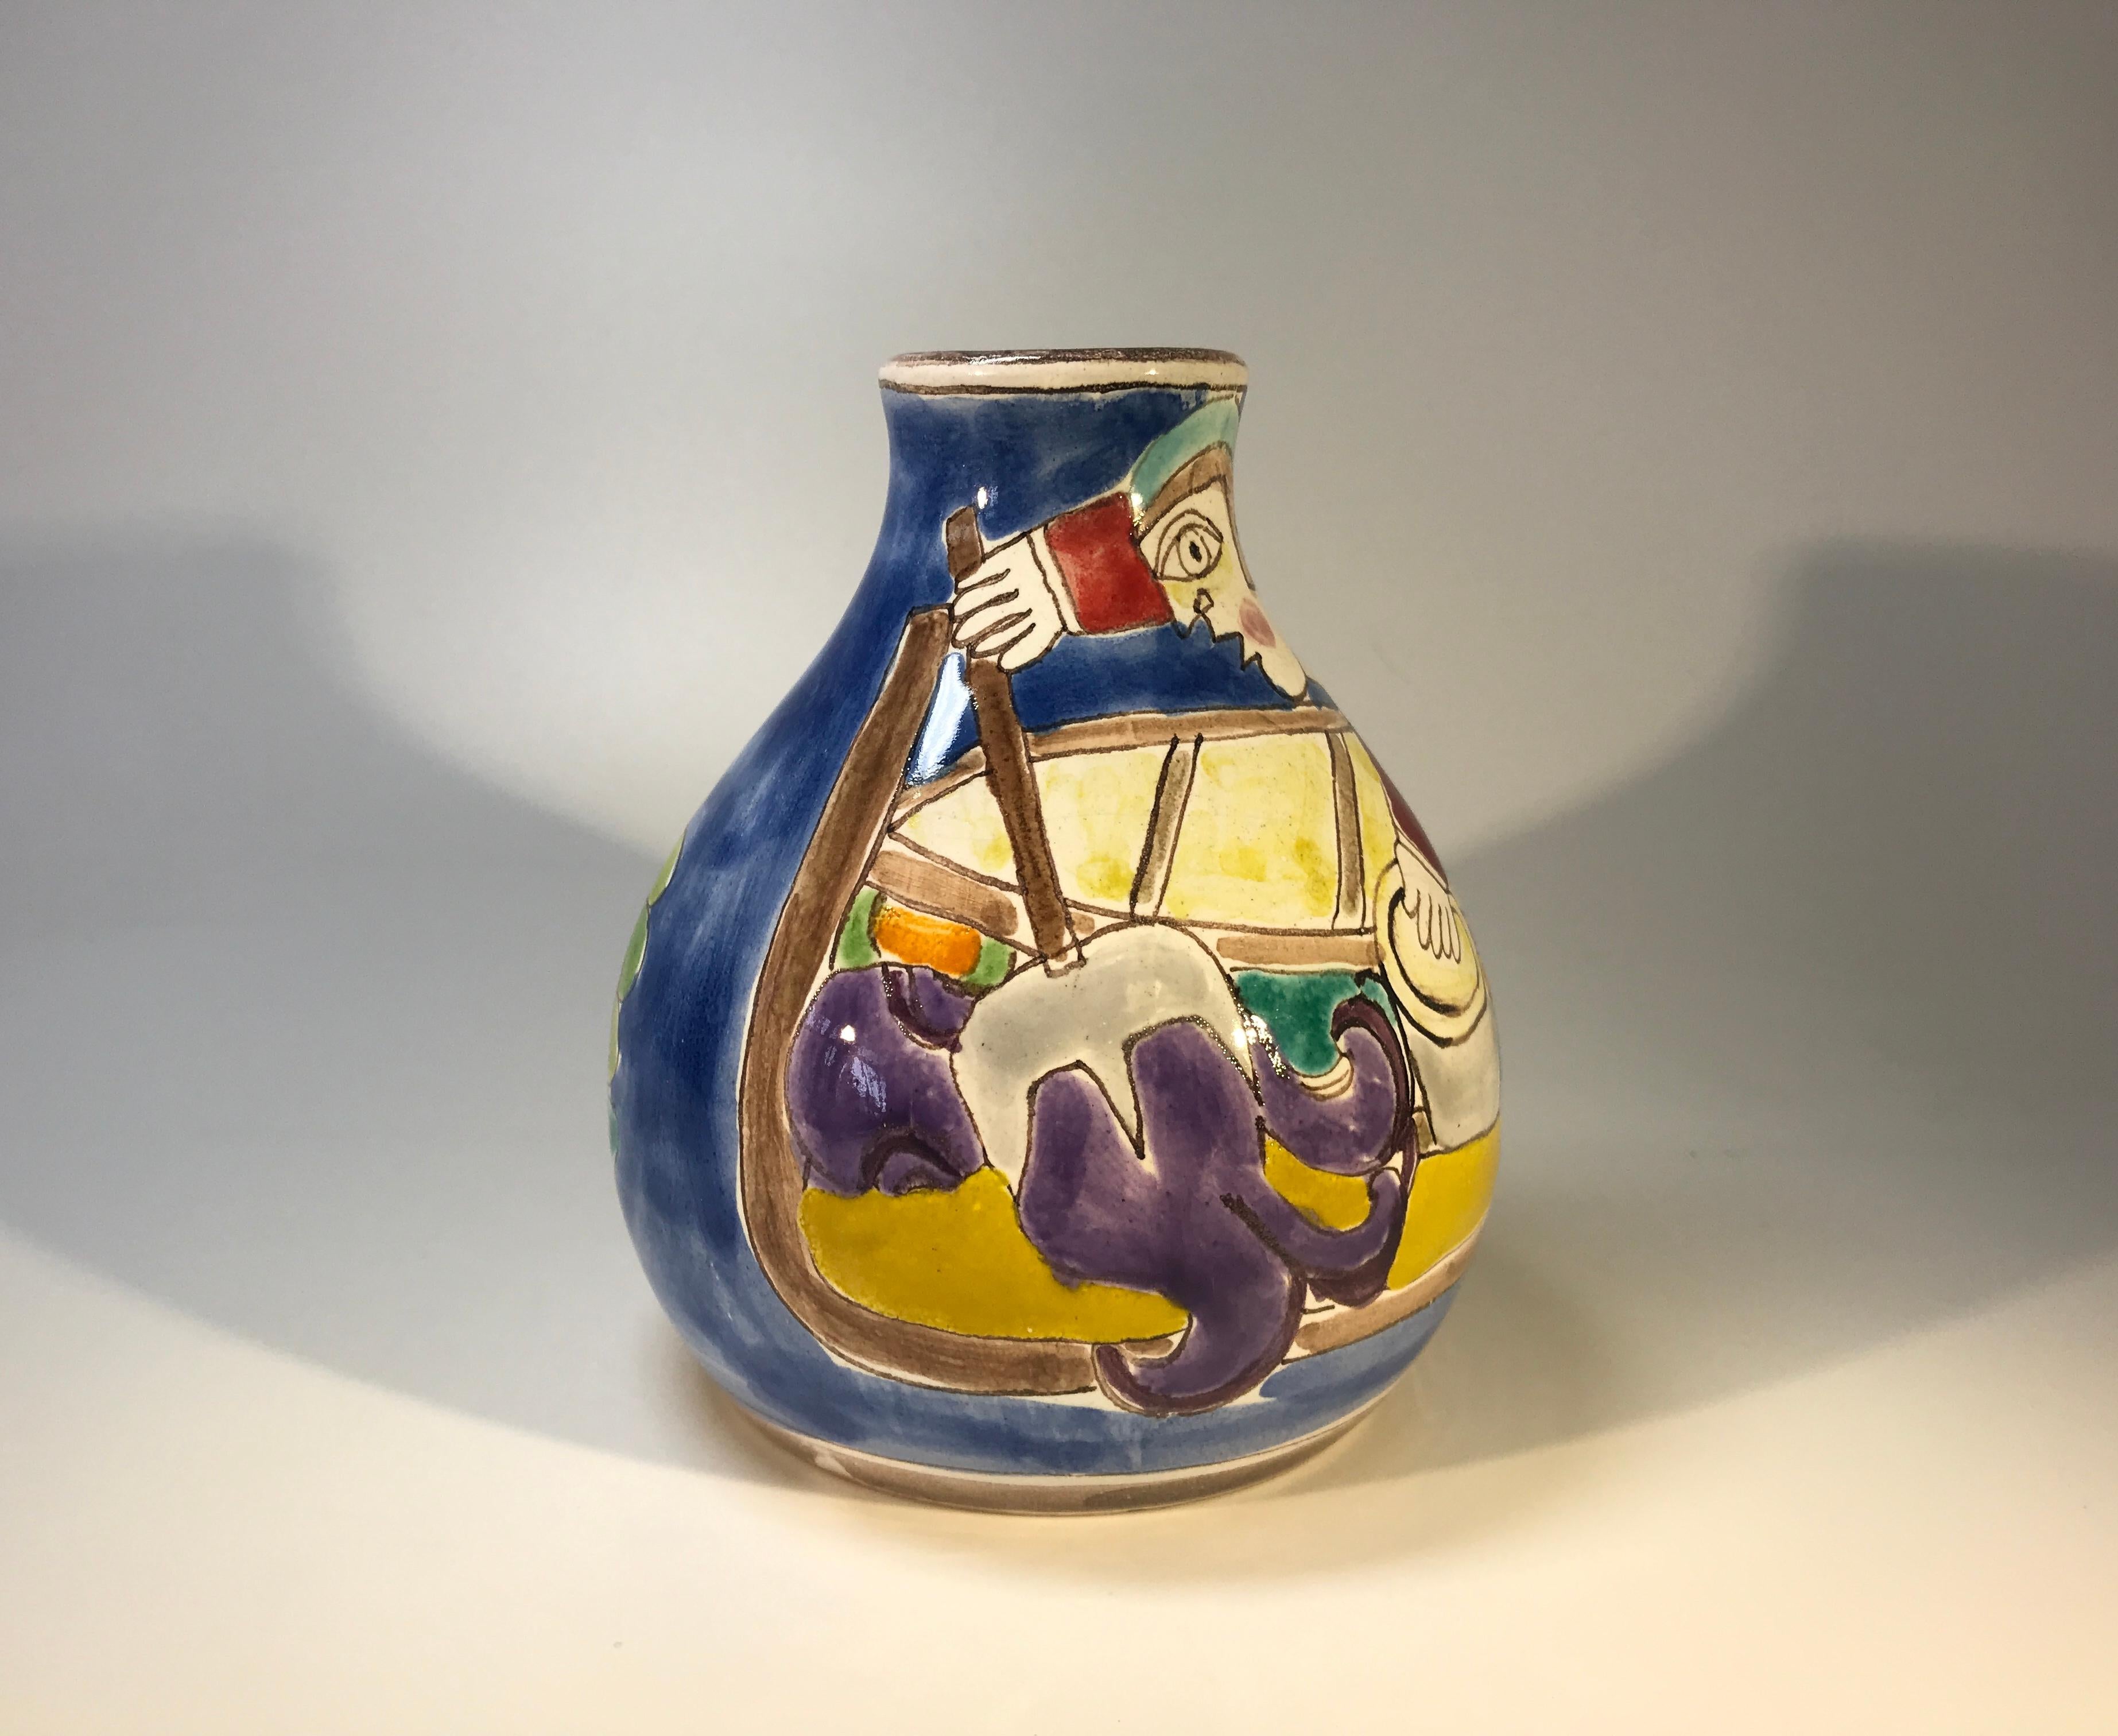 Original and signed by Giovanni Desimone, this hand painted bulbous vase is full of color and life
Typically showing an Italian fishermen at work
A substantial piece of Giovanni at his best
Signed to front by Giovanni Desimone
Signed DeSimone